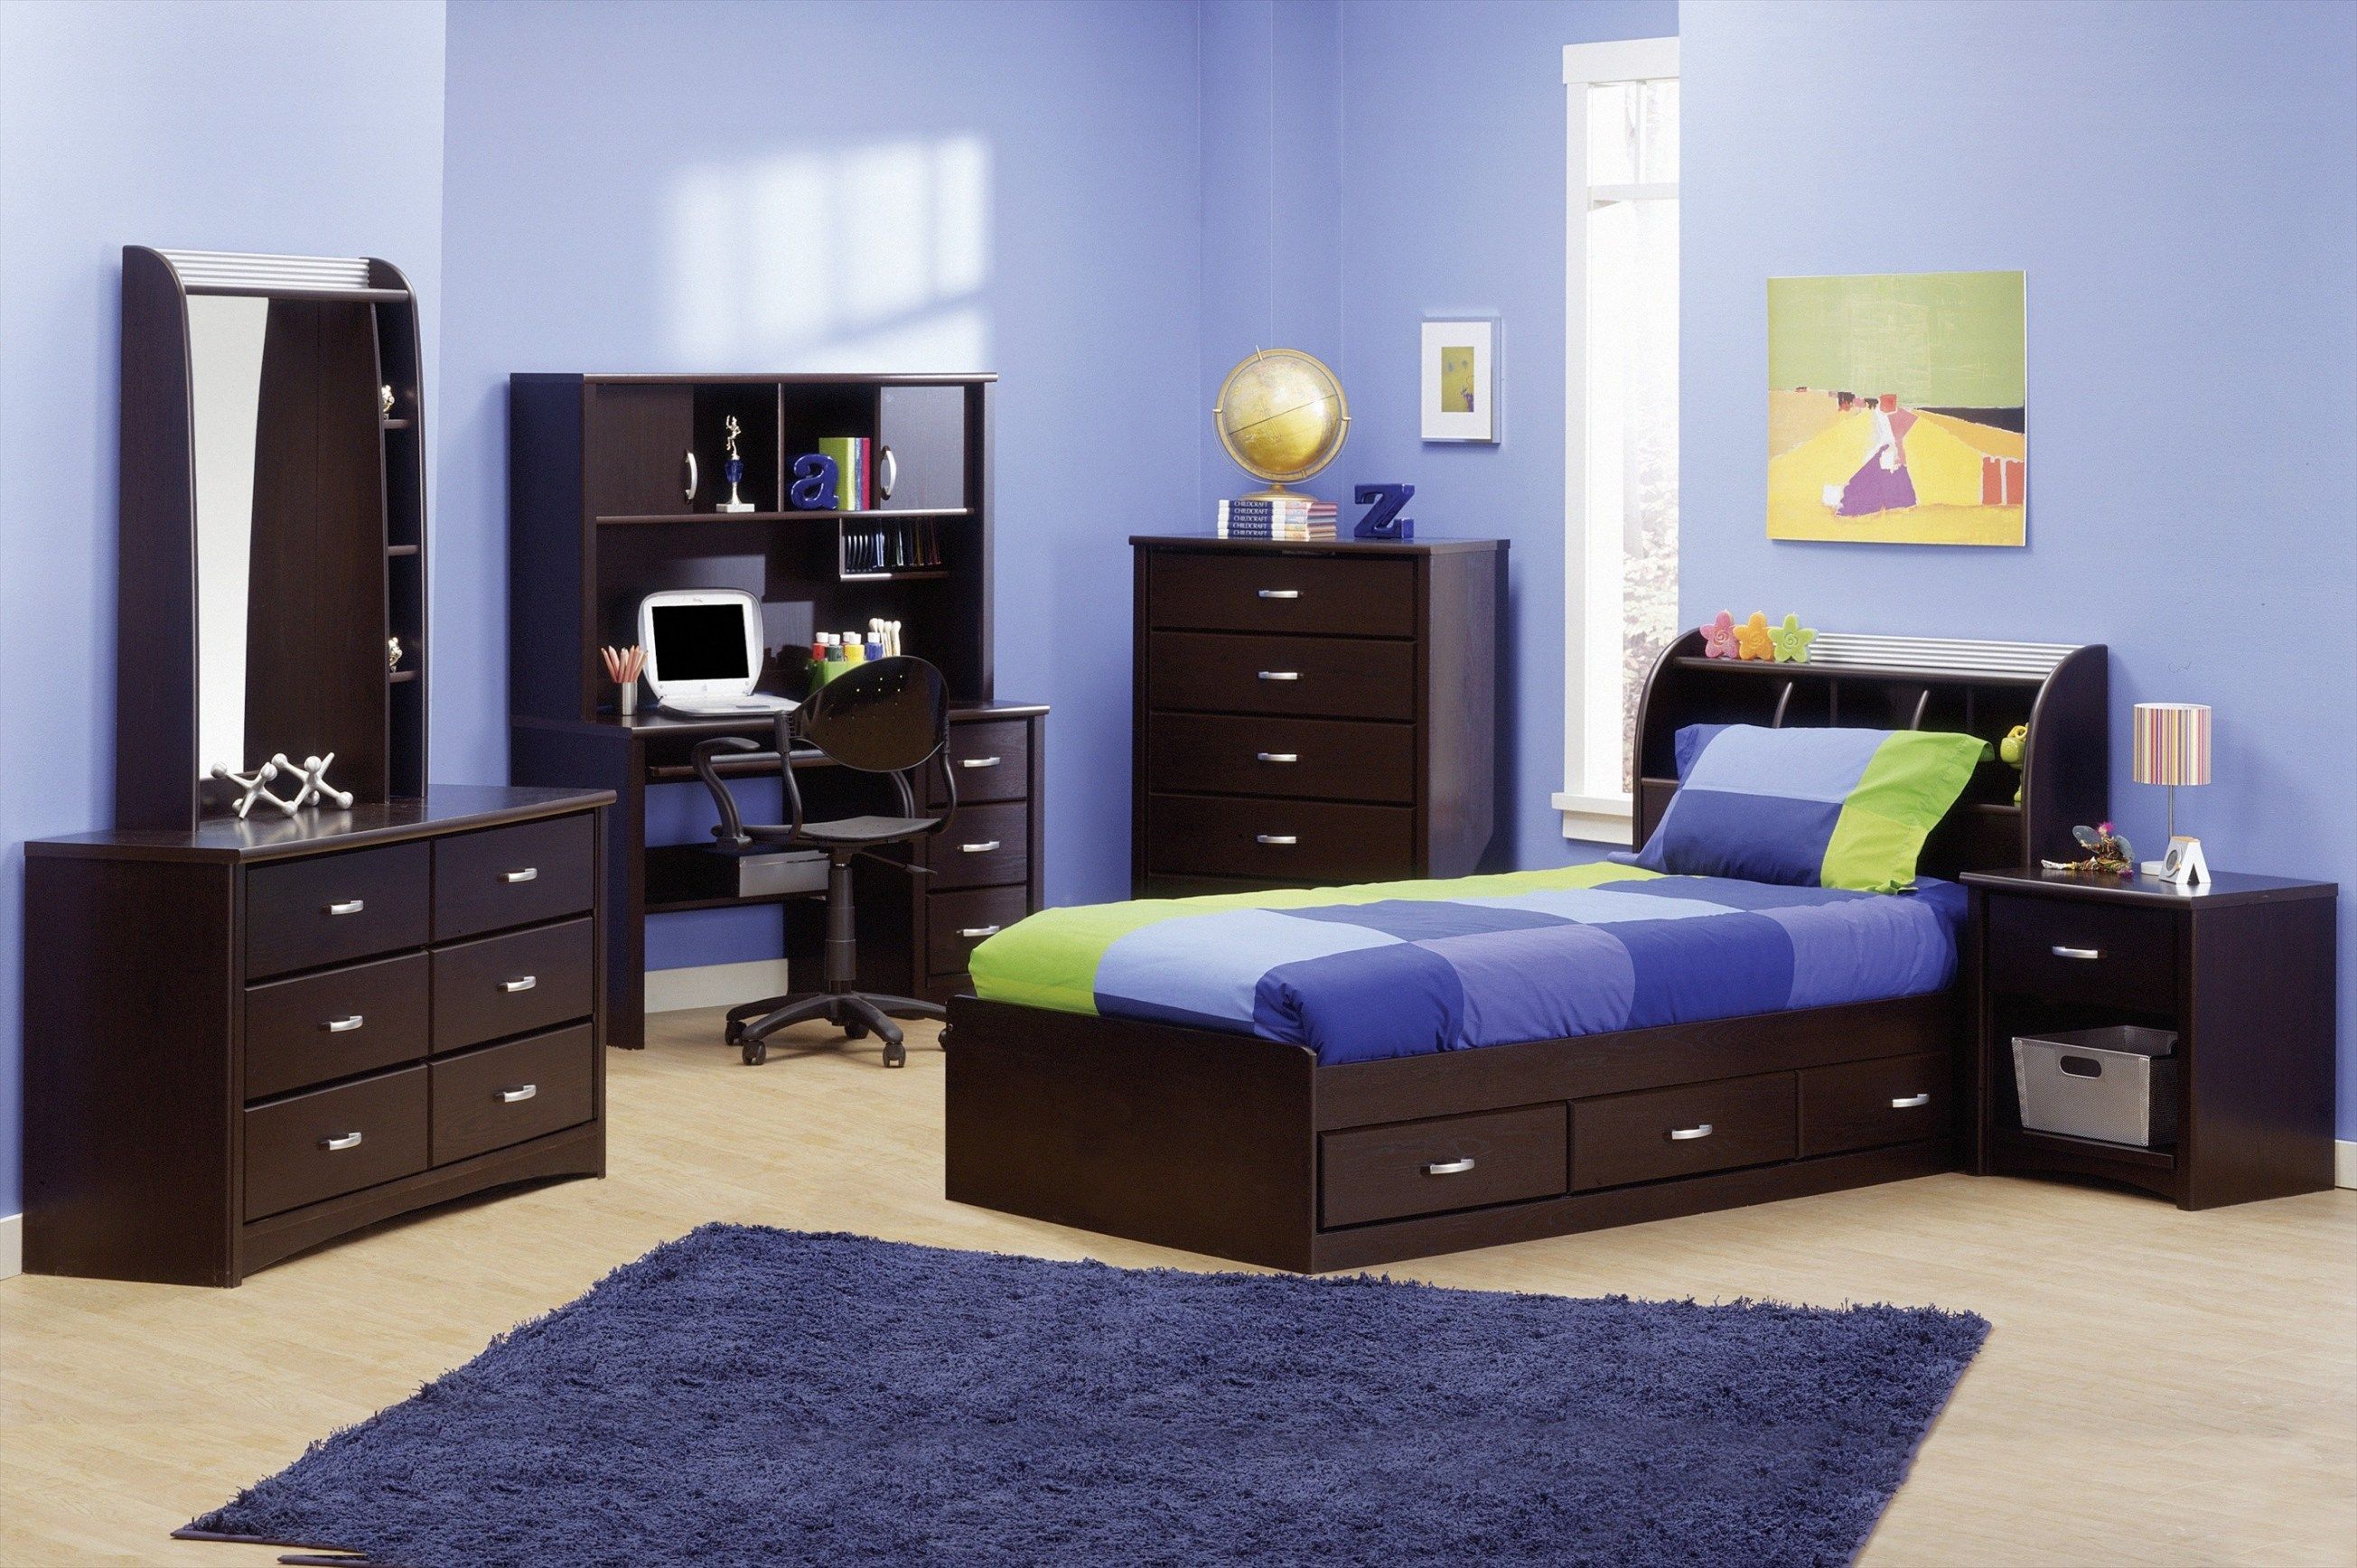 30 Beautiful Image Of Teen Boy Bedroom Furniture Boys intended for sizing 2609 X 1736